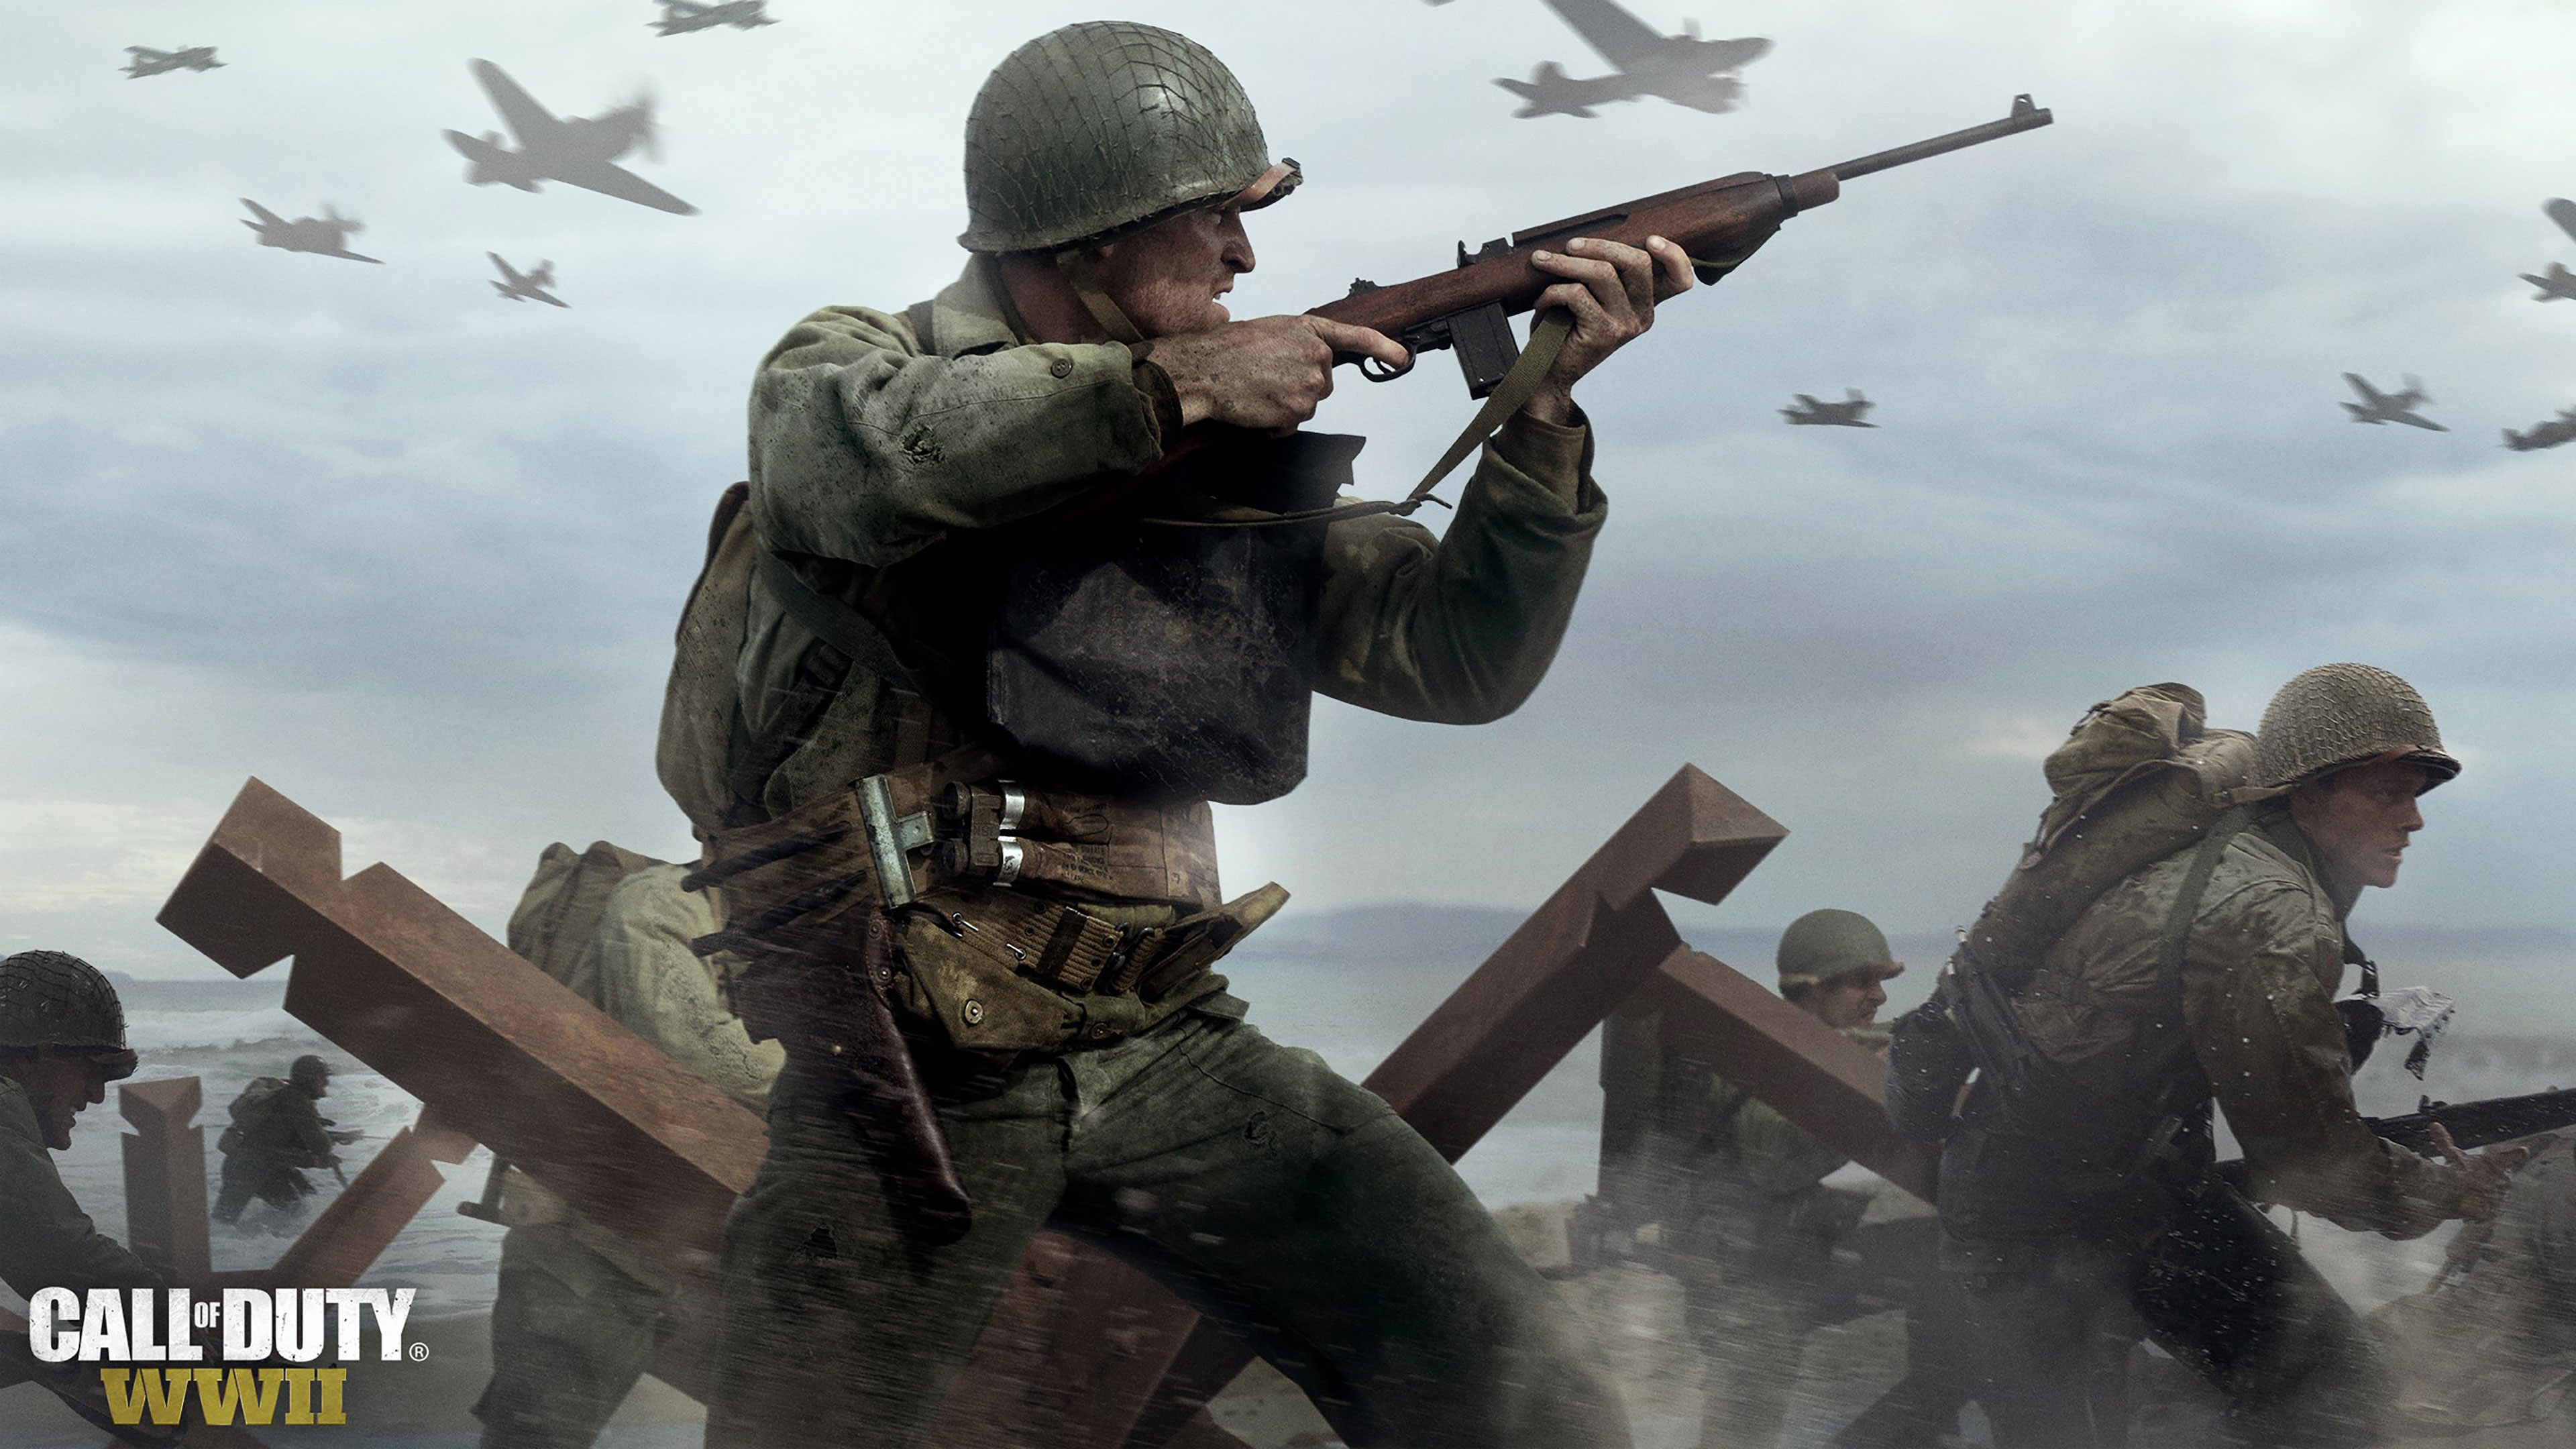 Free download CALL OF DUTY WWII Wallpaper in Ultra HD 4K [3840x2160] for your Desktop, Mobile & Tablet. Explore Ww2 Wallpaper. Aircraft Wallpaper, Airplane Wallpaper, Jet Wallpaper